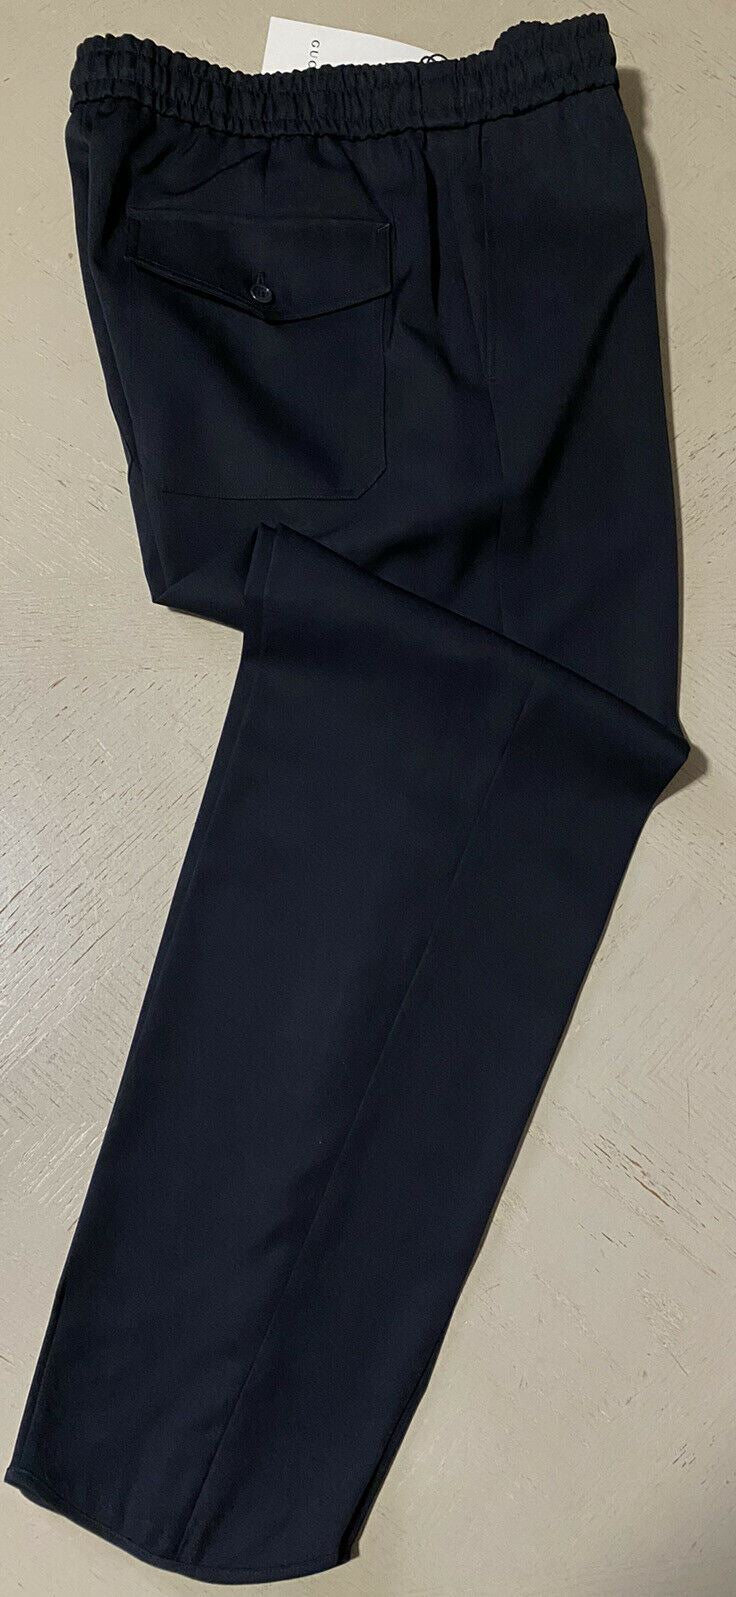 New $1300 Gucci Men’s Wool Jegging  Pants Midnight Blue 36 US ( 52 Eu ) Italy